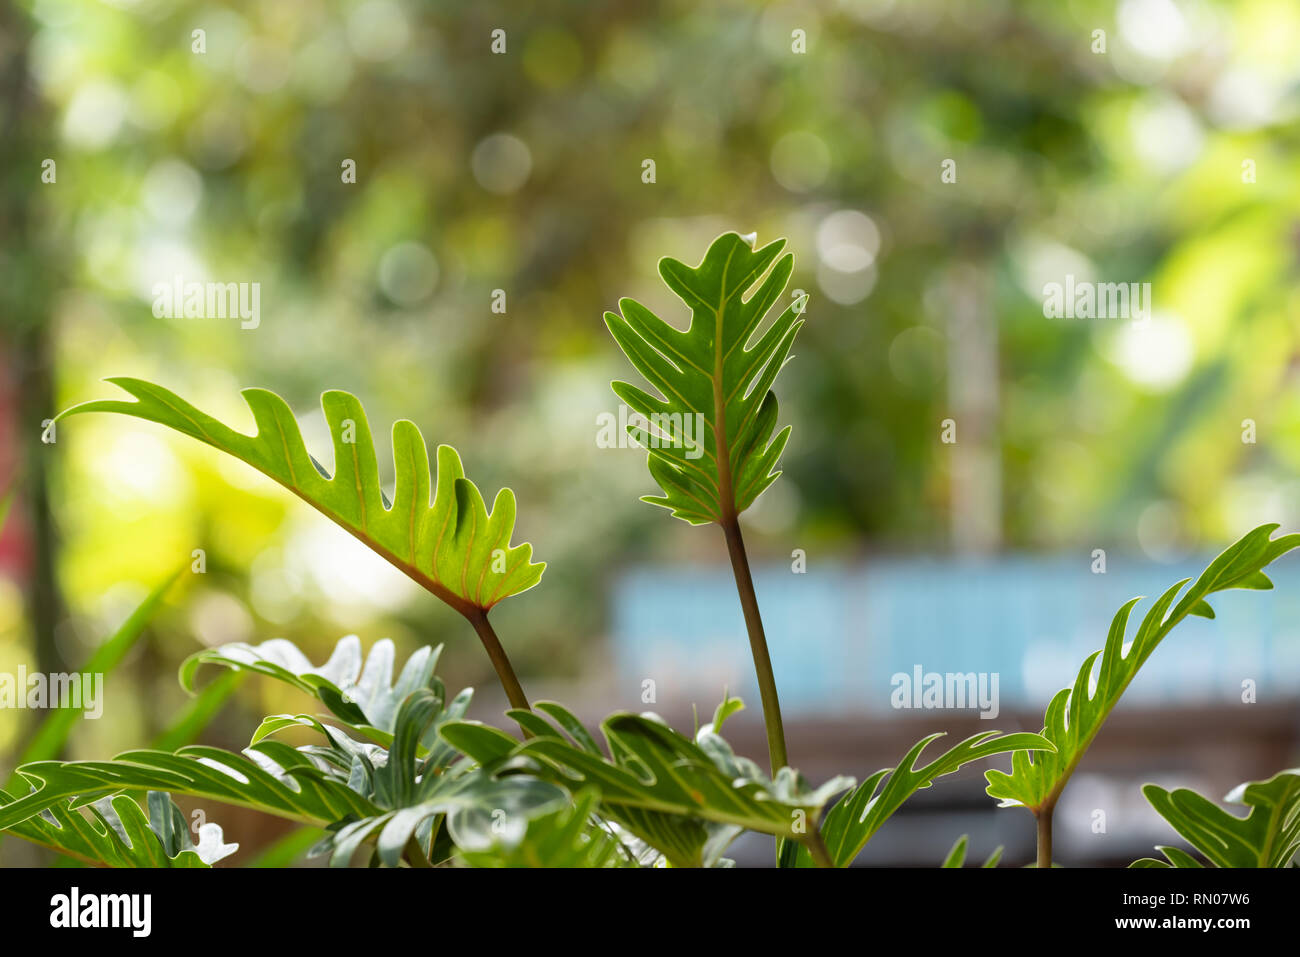 Philodendron,beautiful shape green leaves and healthy foliage over green blurred  background Stock Photo